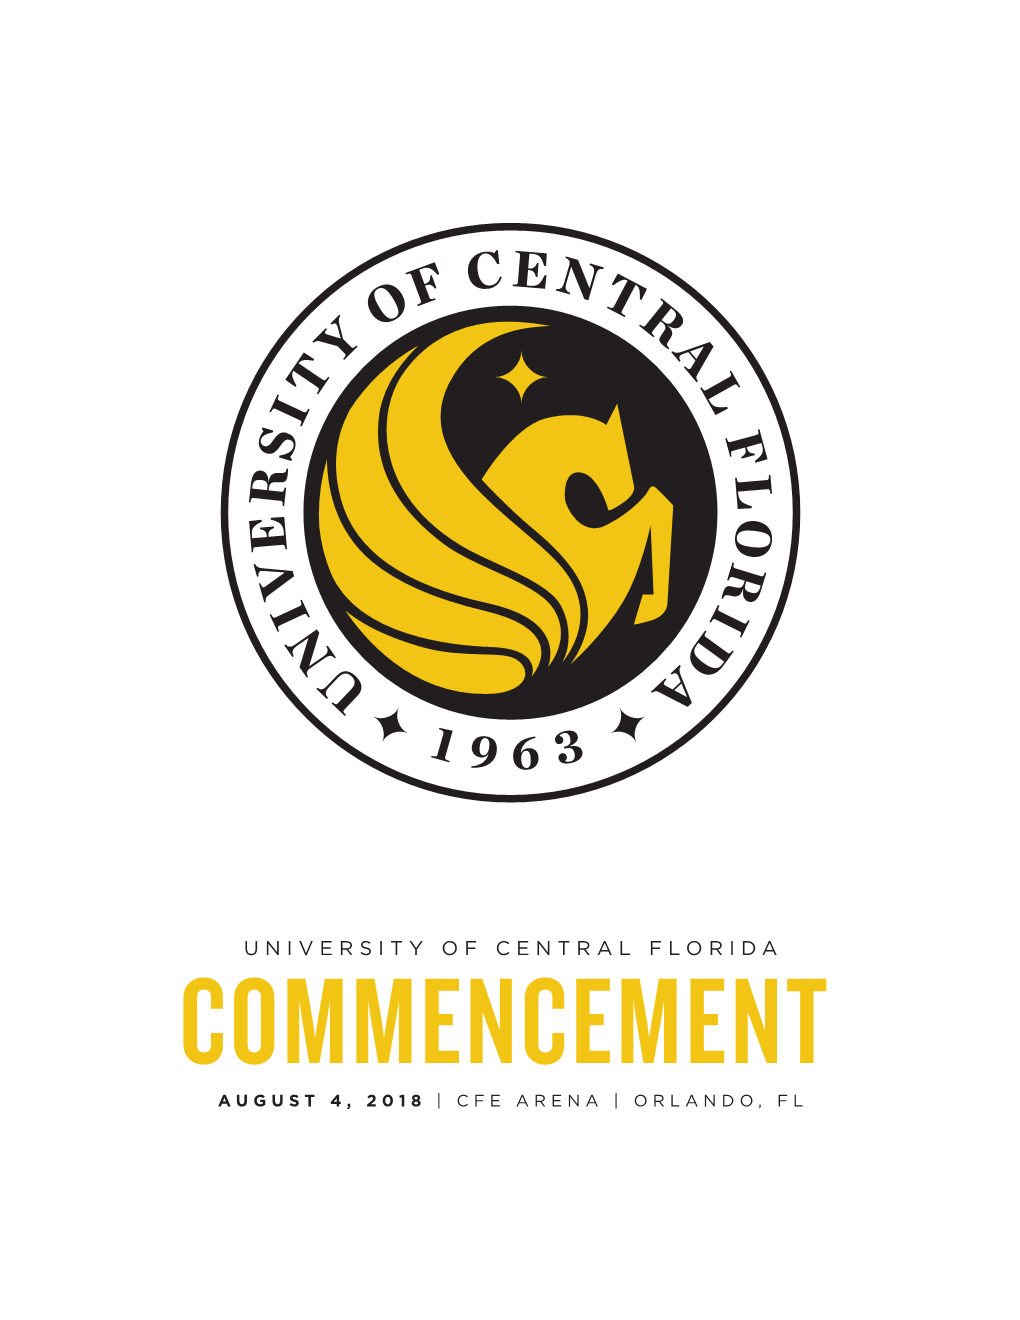 University of Central Florida Commencement August 4, 2018 | Cfe Arena | Orlando, Fl Live the Ucf Creed